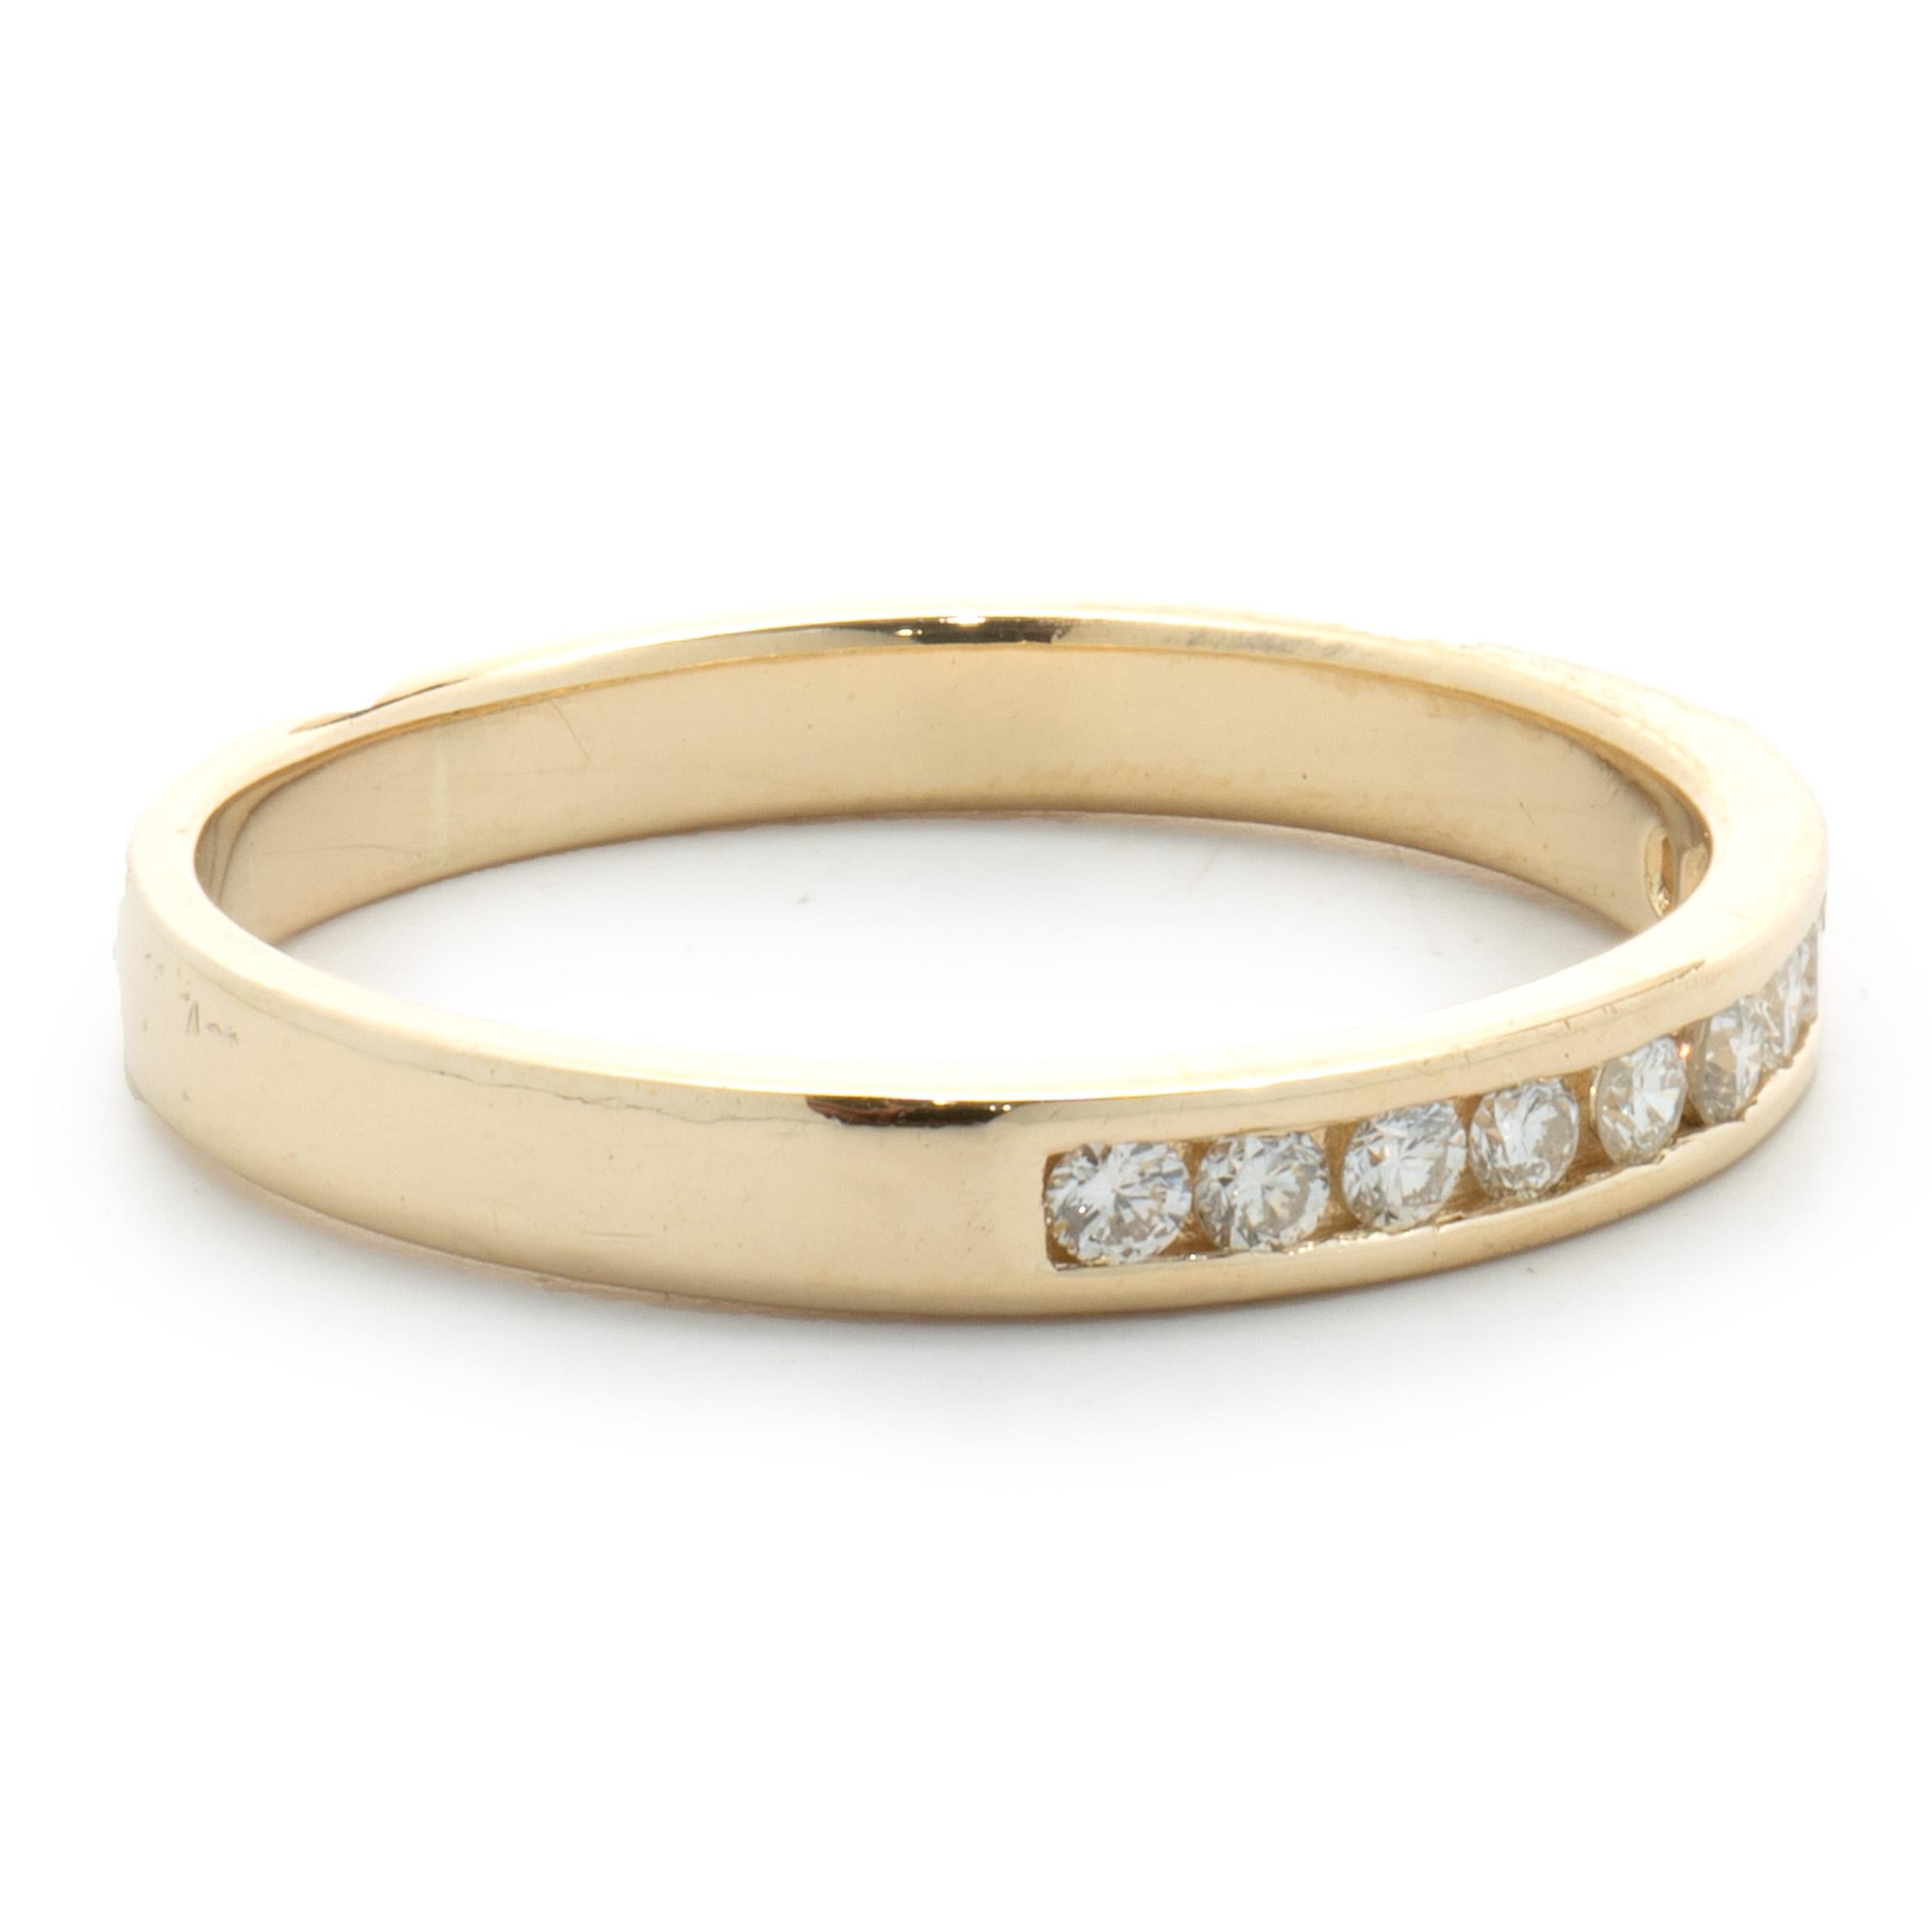 14 Karat Yellow Gold Channel Set Diamond Band In Excellent Condition For Sale In Scottsdale, AZ